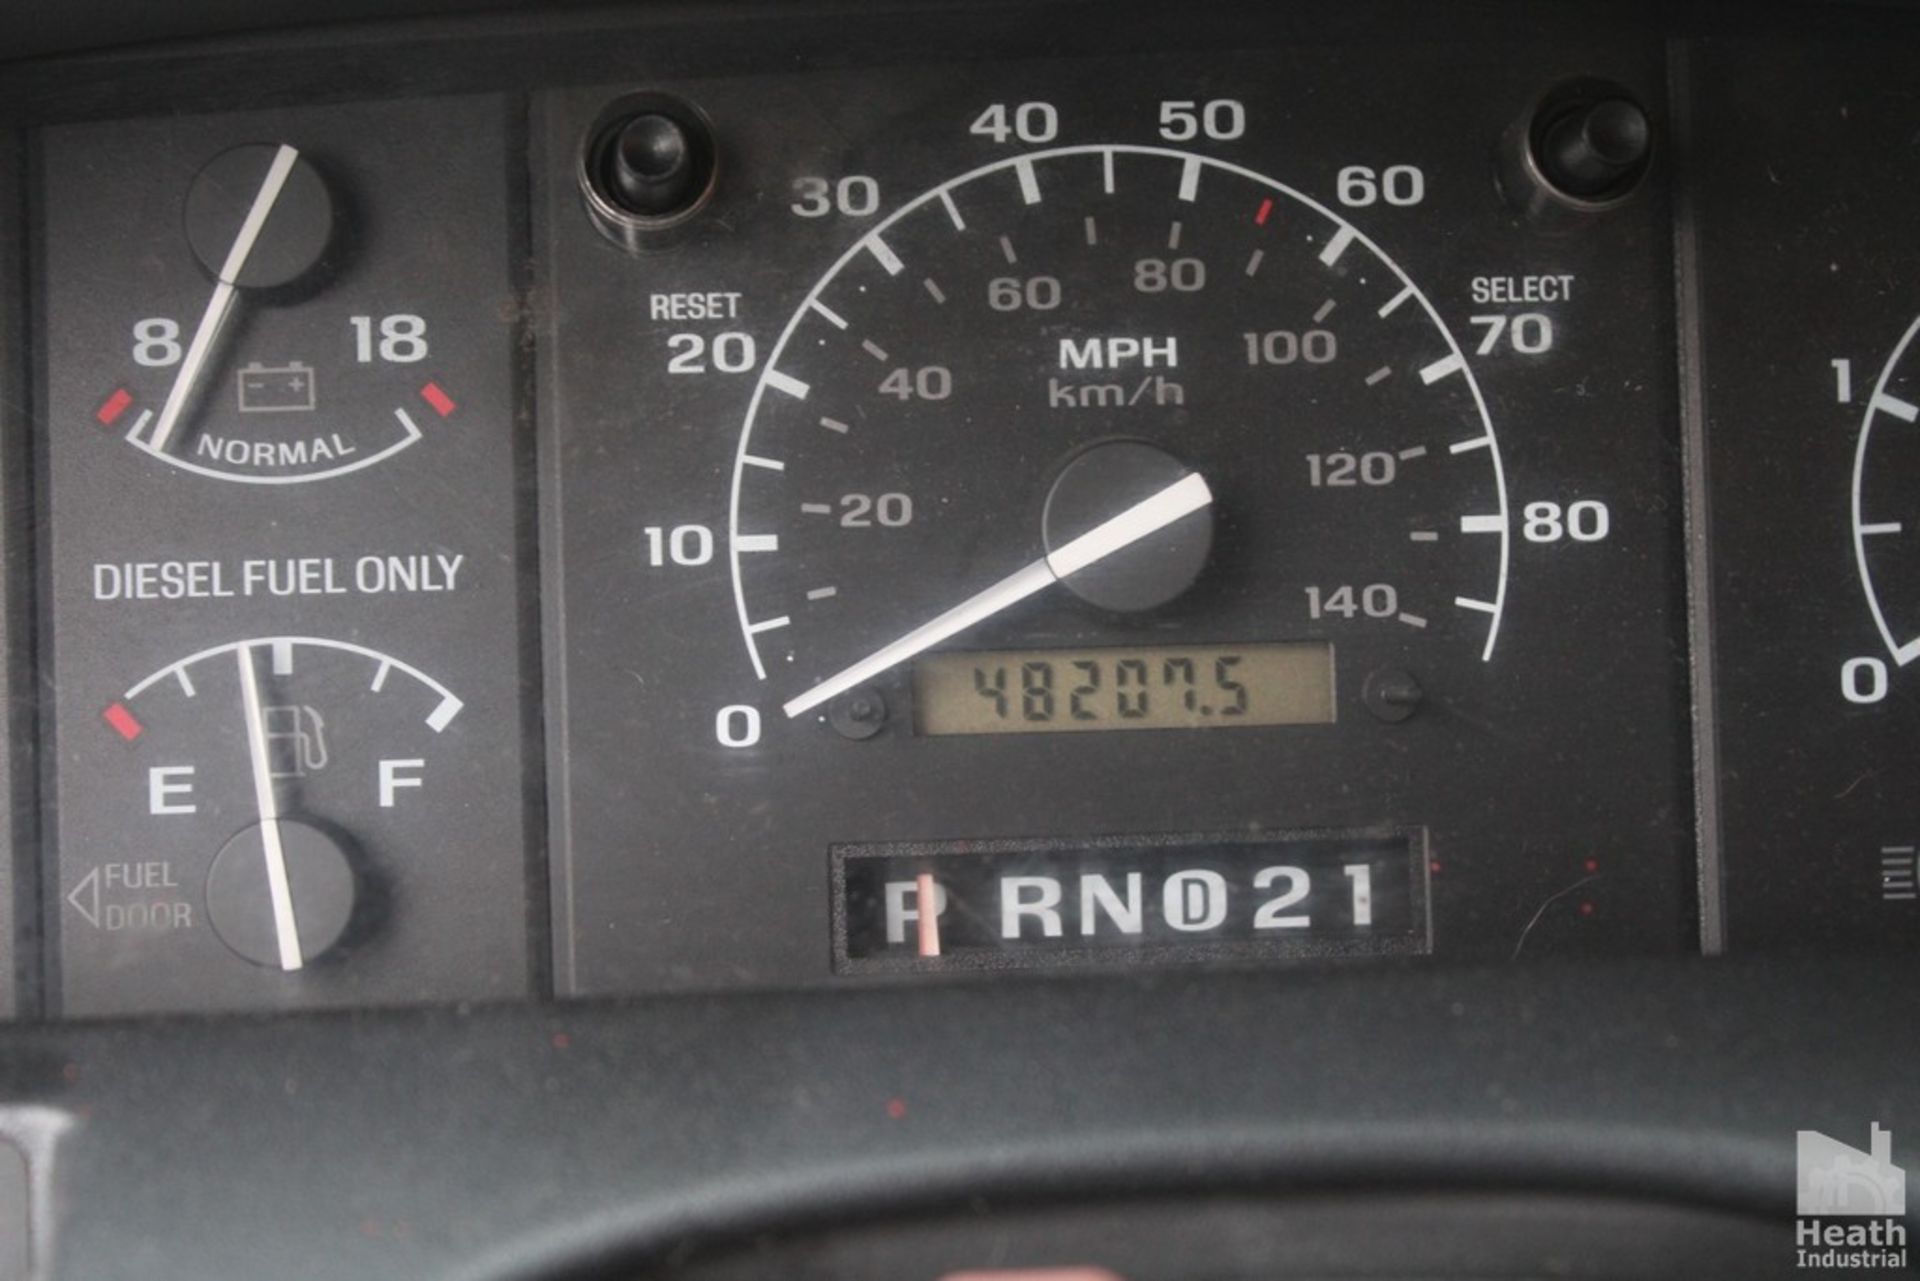 FORD F350 CREW CAB FIFTH WHEEL TOTER | GAS |CB RADIO | VIN 2FTJW35M2NCA25224 (1992) | INDICATED - Image 5 of 7